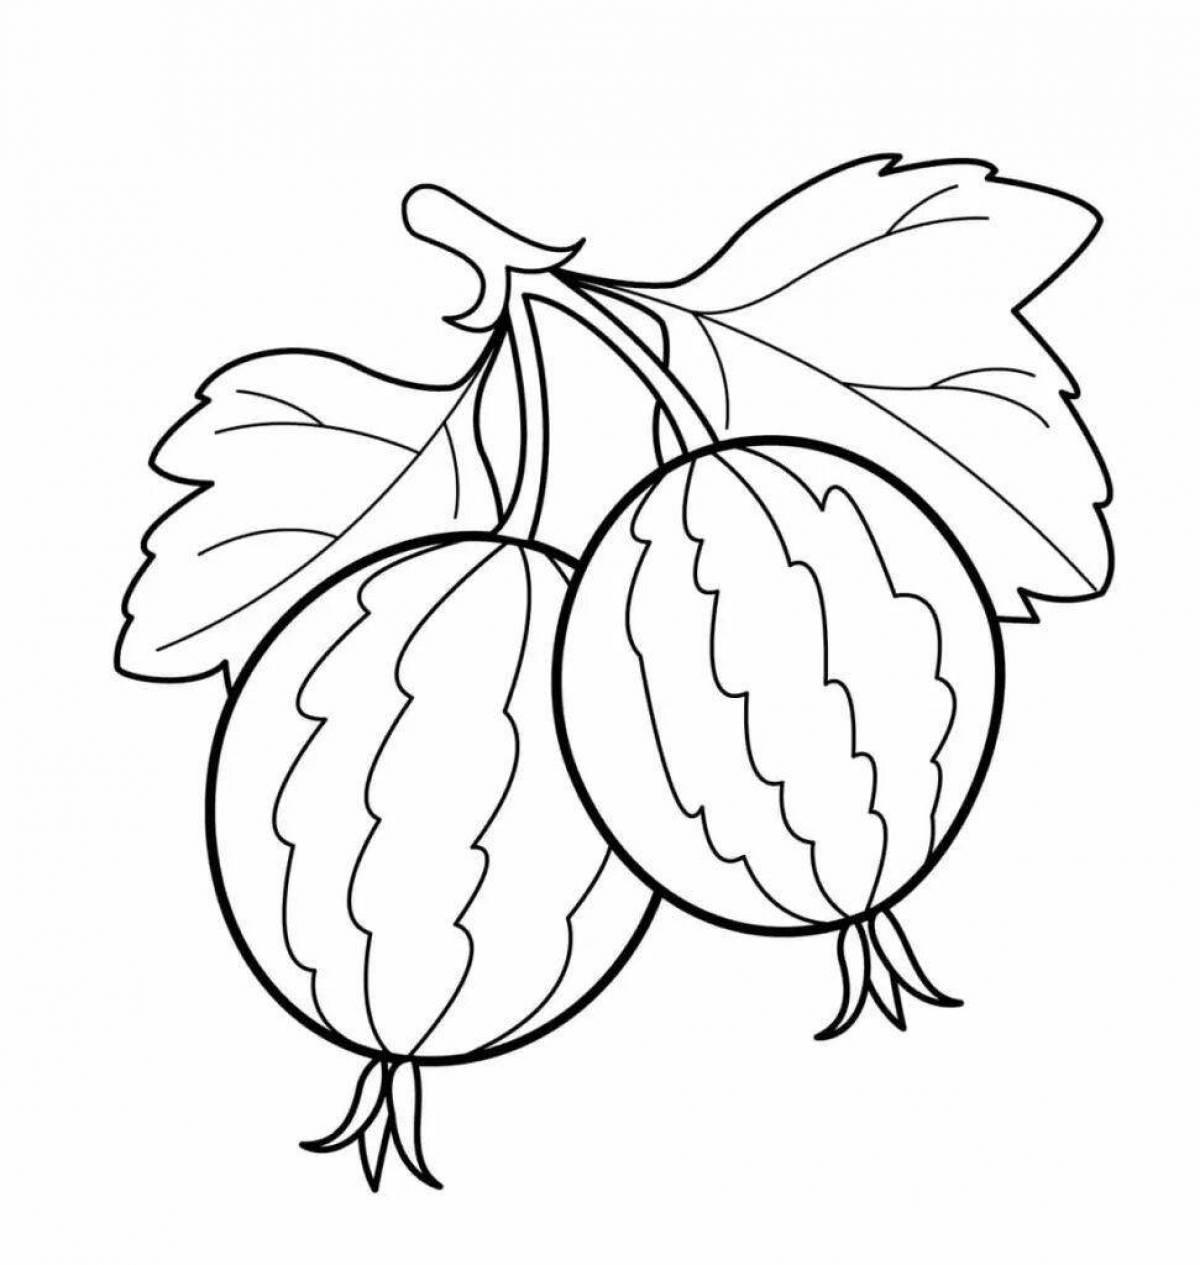 Great gooseberry coloring book for kids